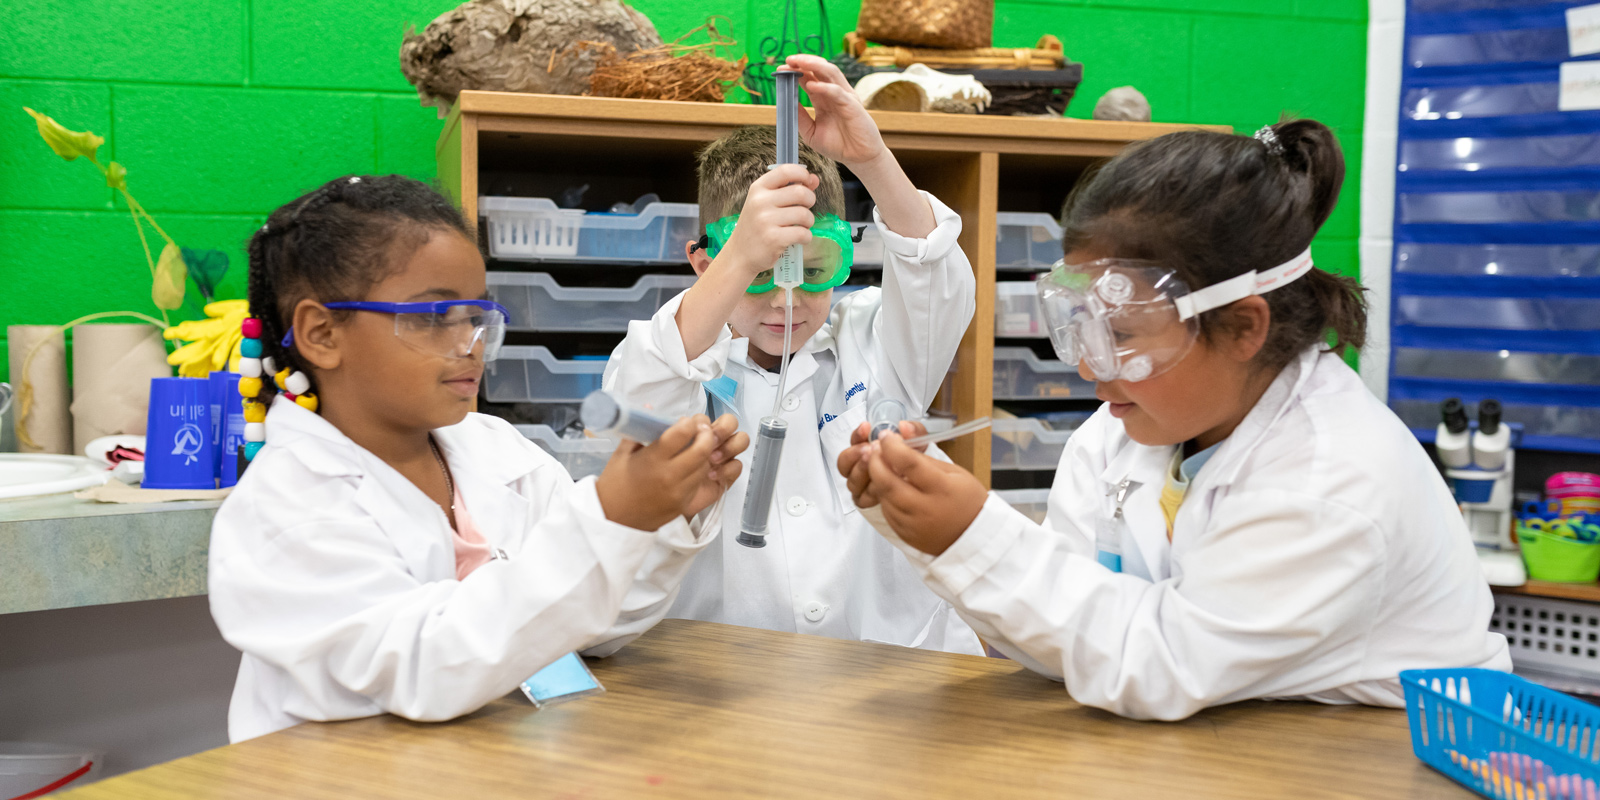 Three students doing an experiment while wearing lab coats.